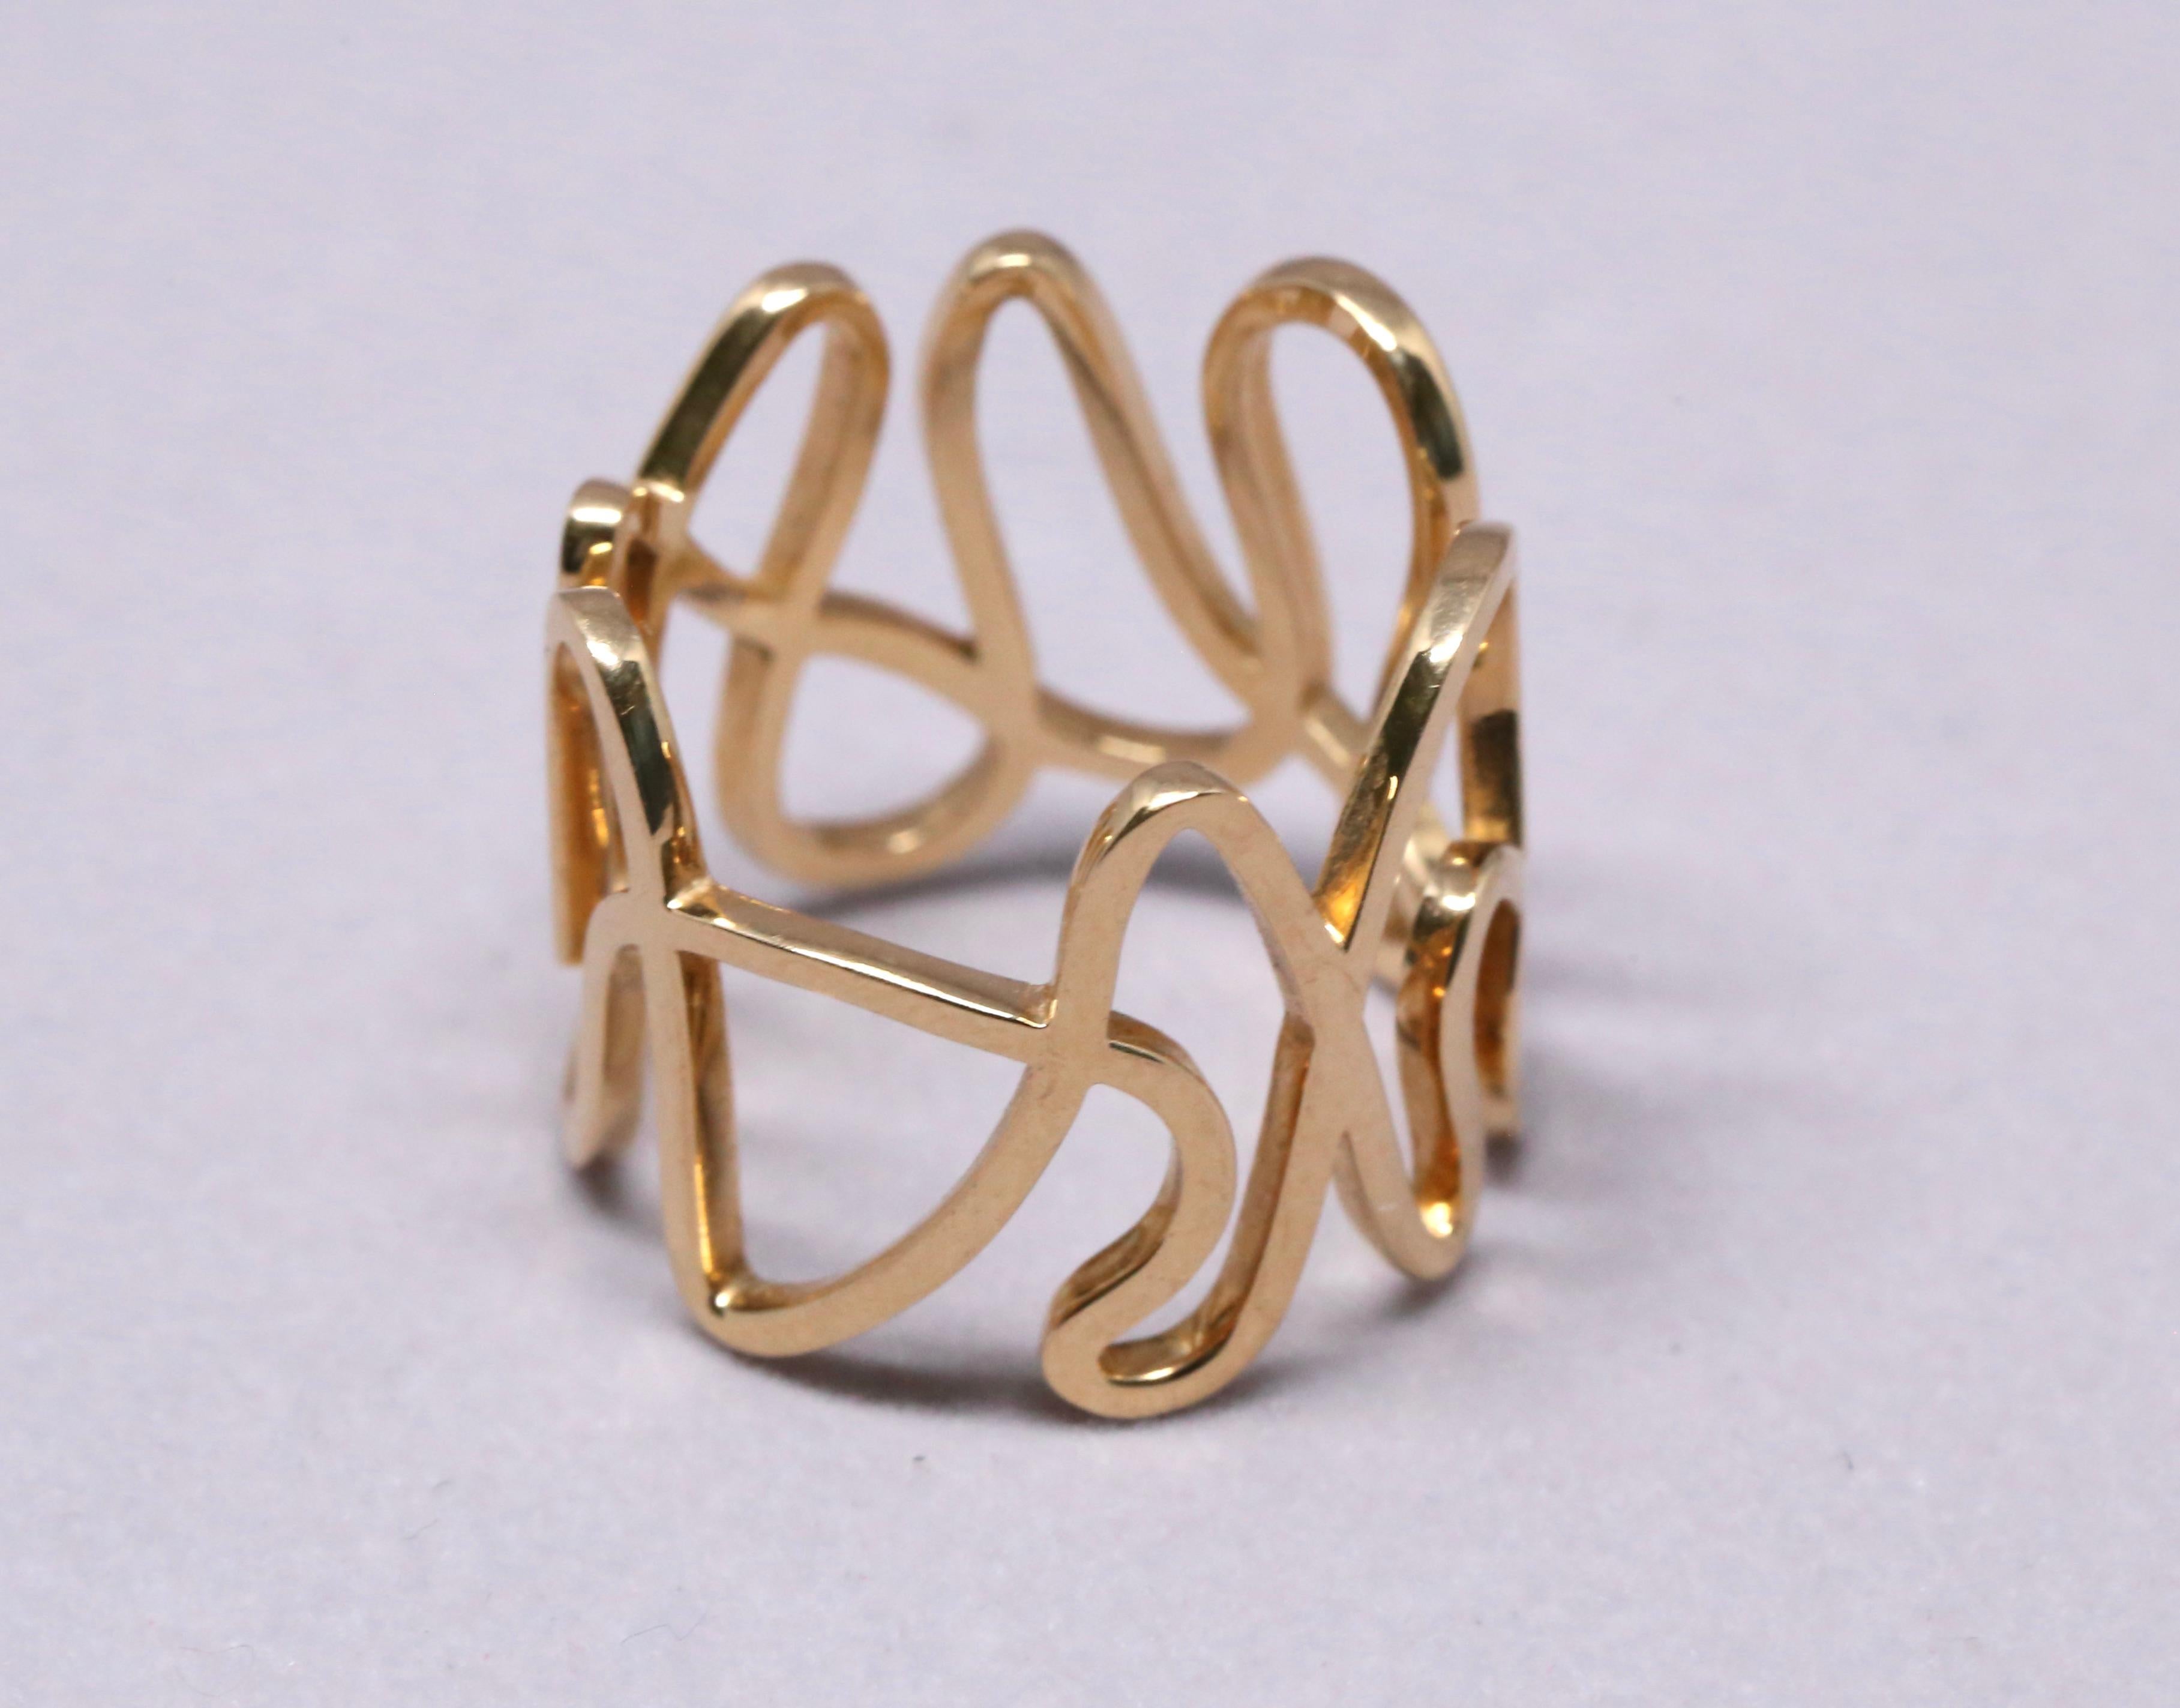 Reposssi 18k Gold 'White Noise' Ring In Excellent Condition For Sale In Oakland, CA